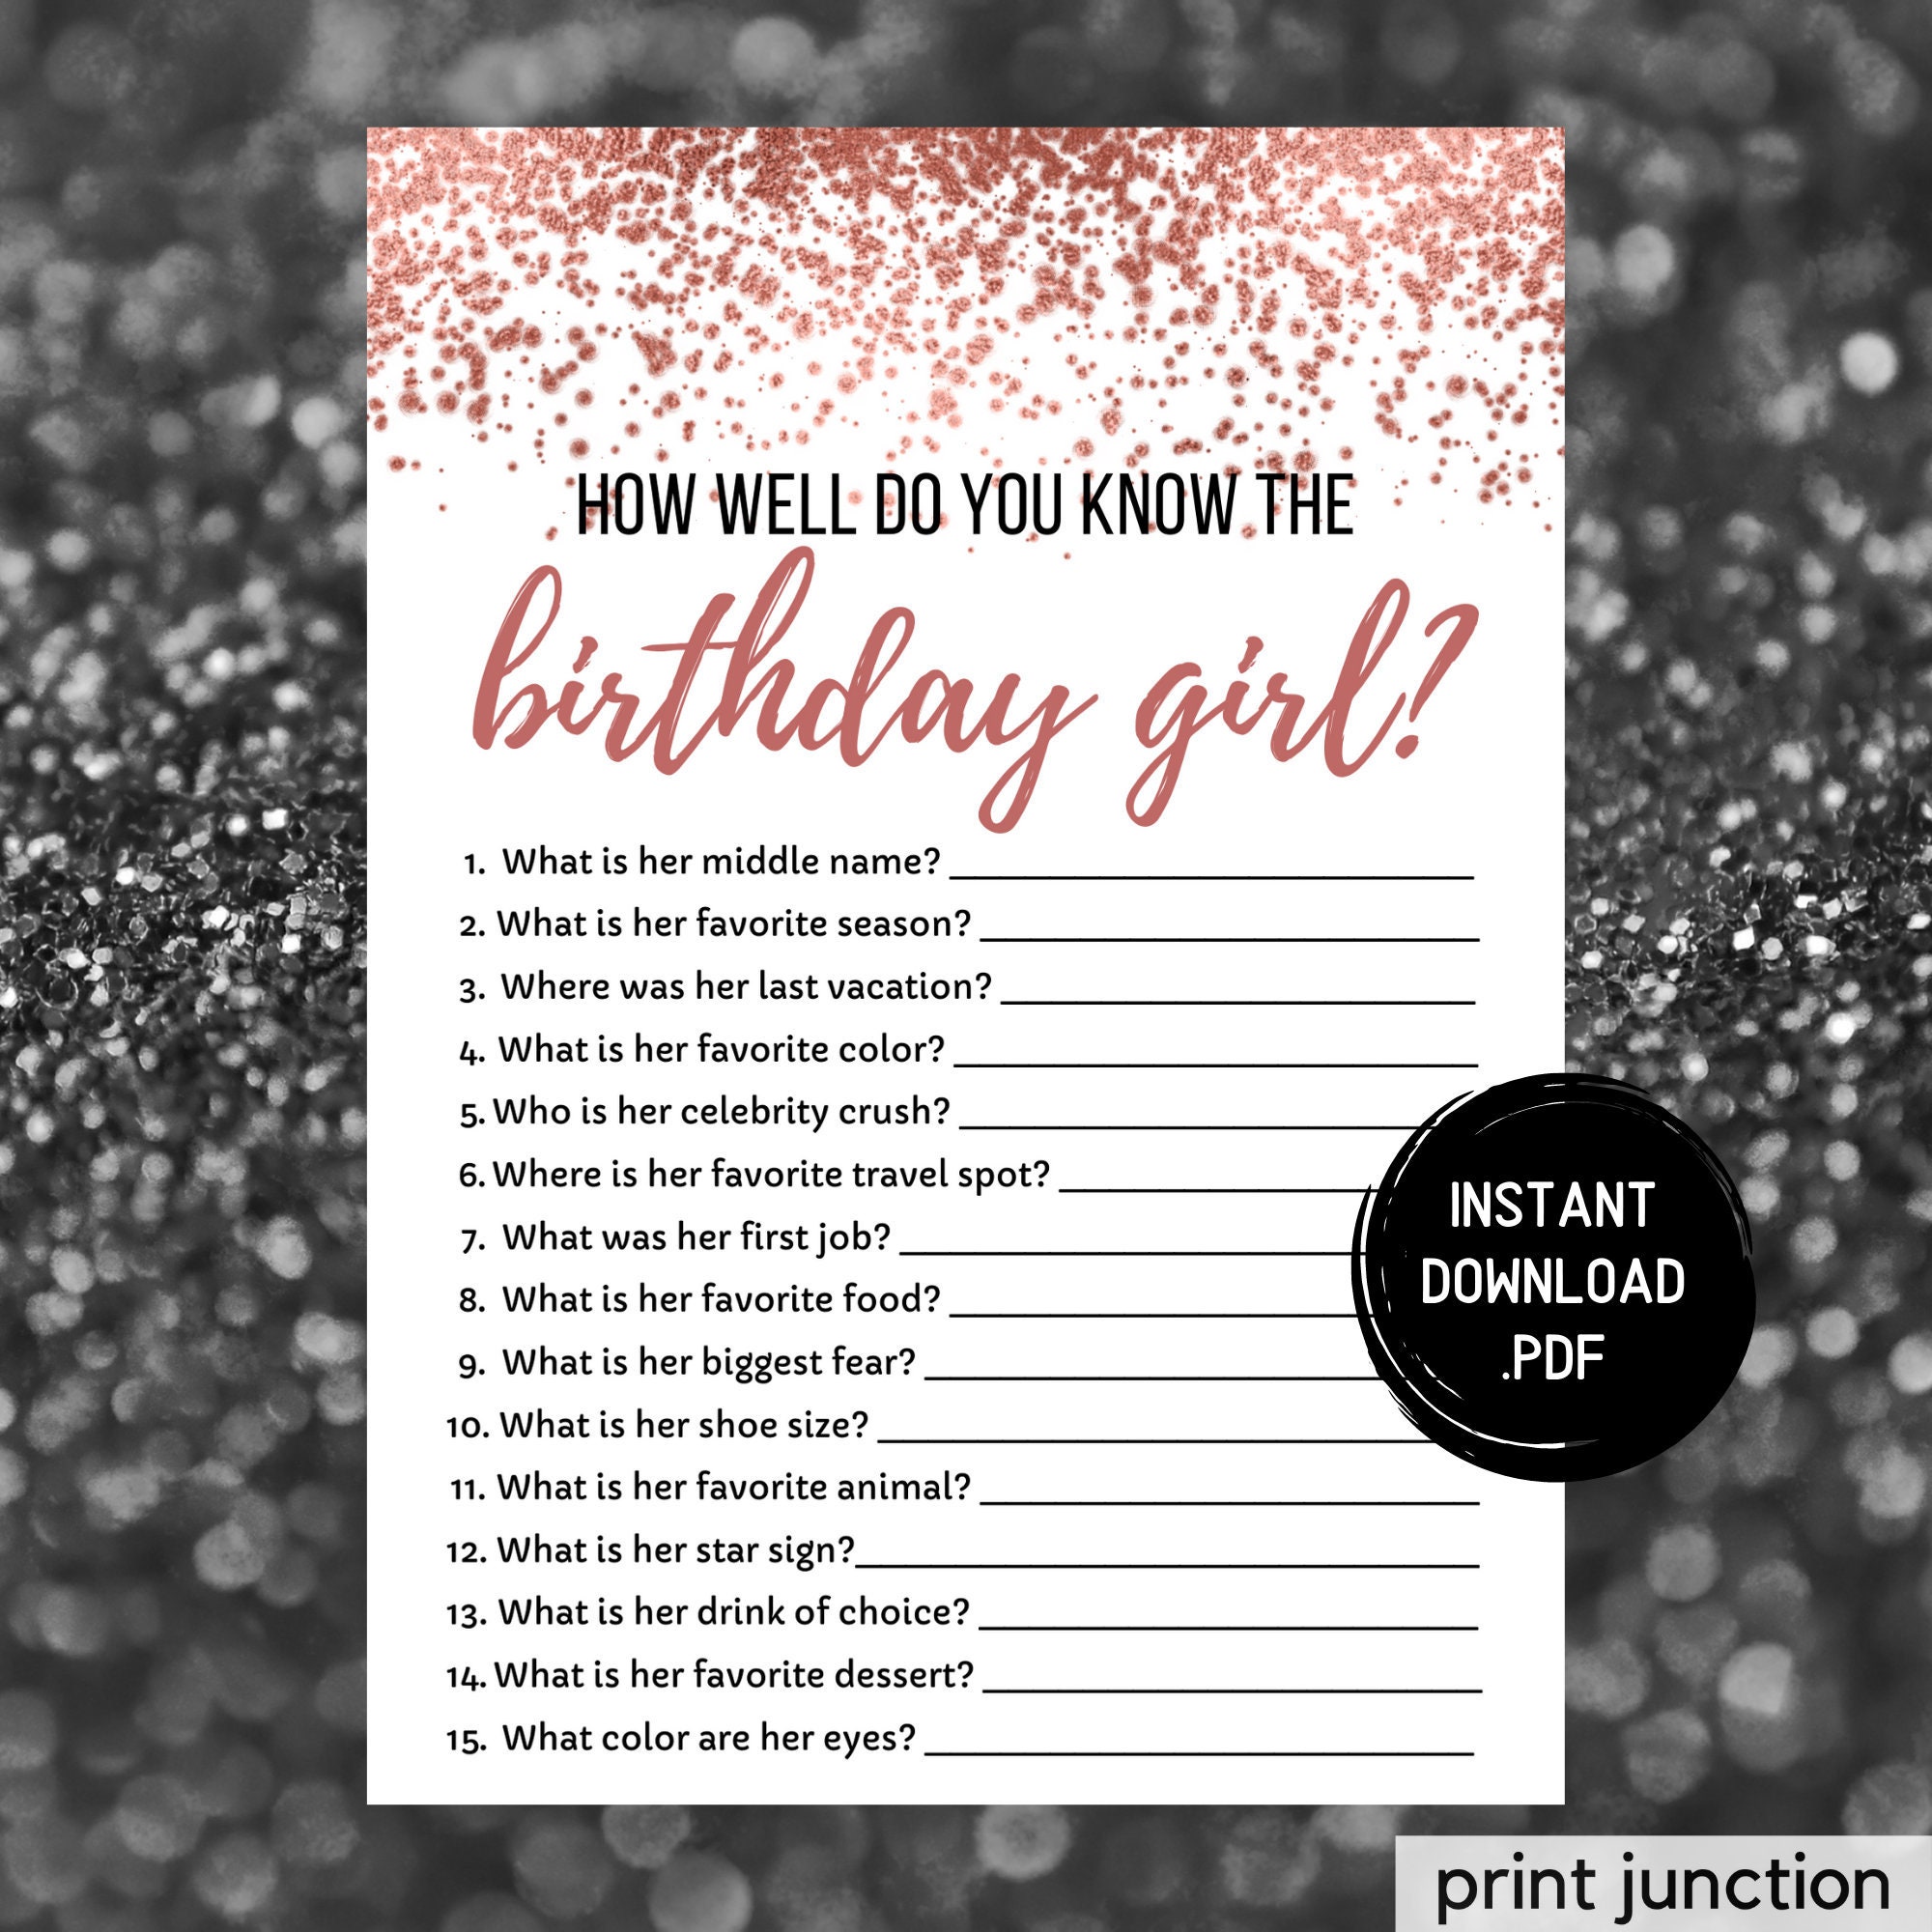 who-knows-the-birthday-girl-best-how-well-do-you-know-the-etsy